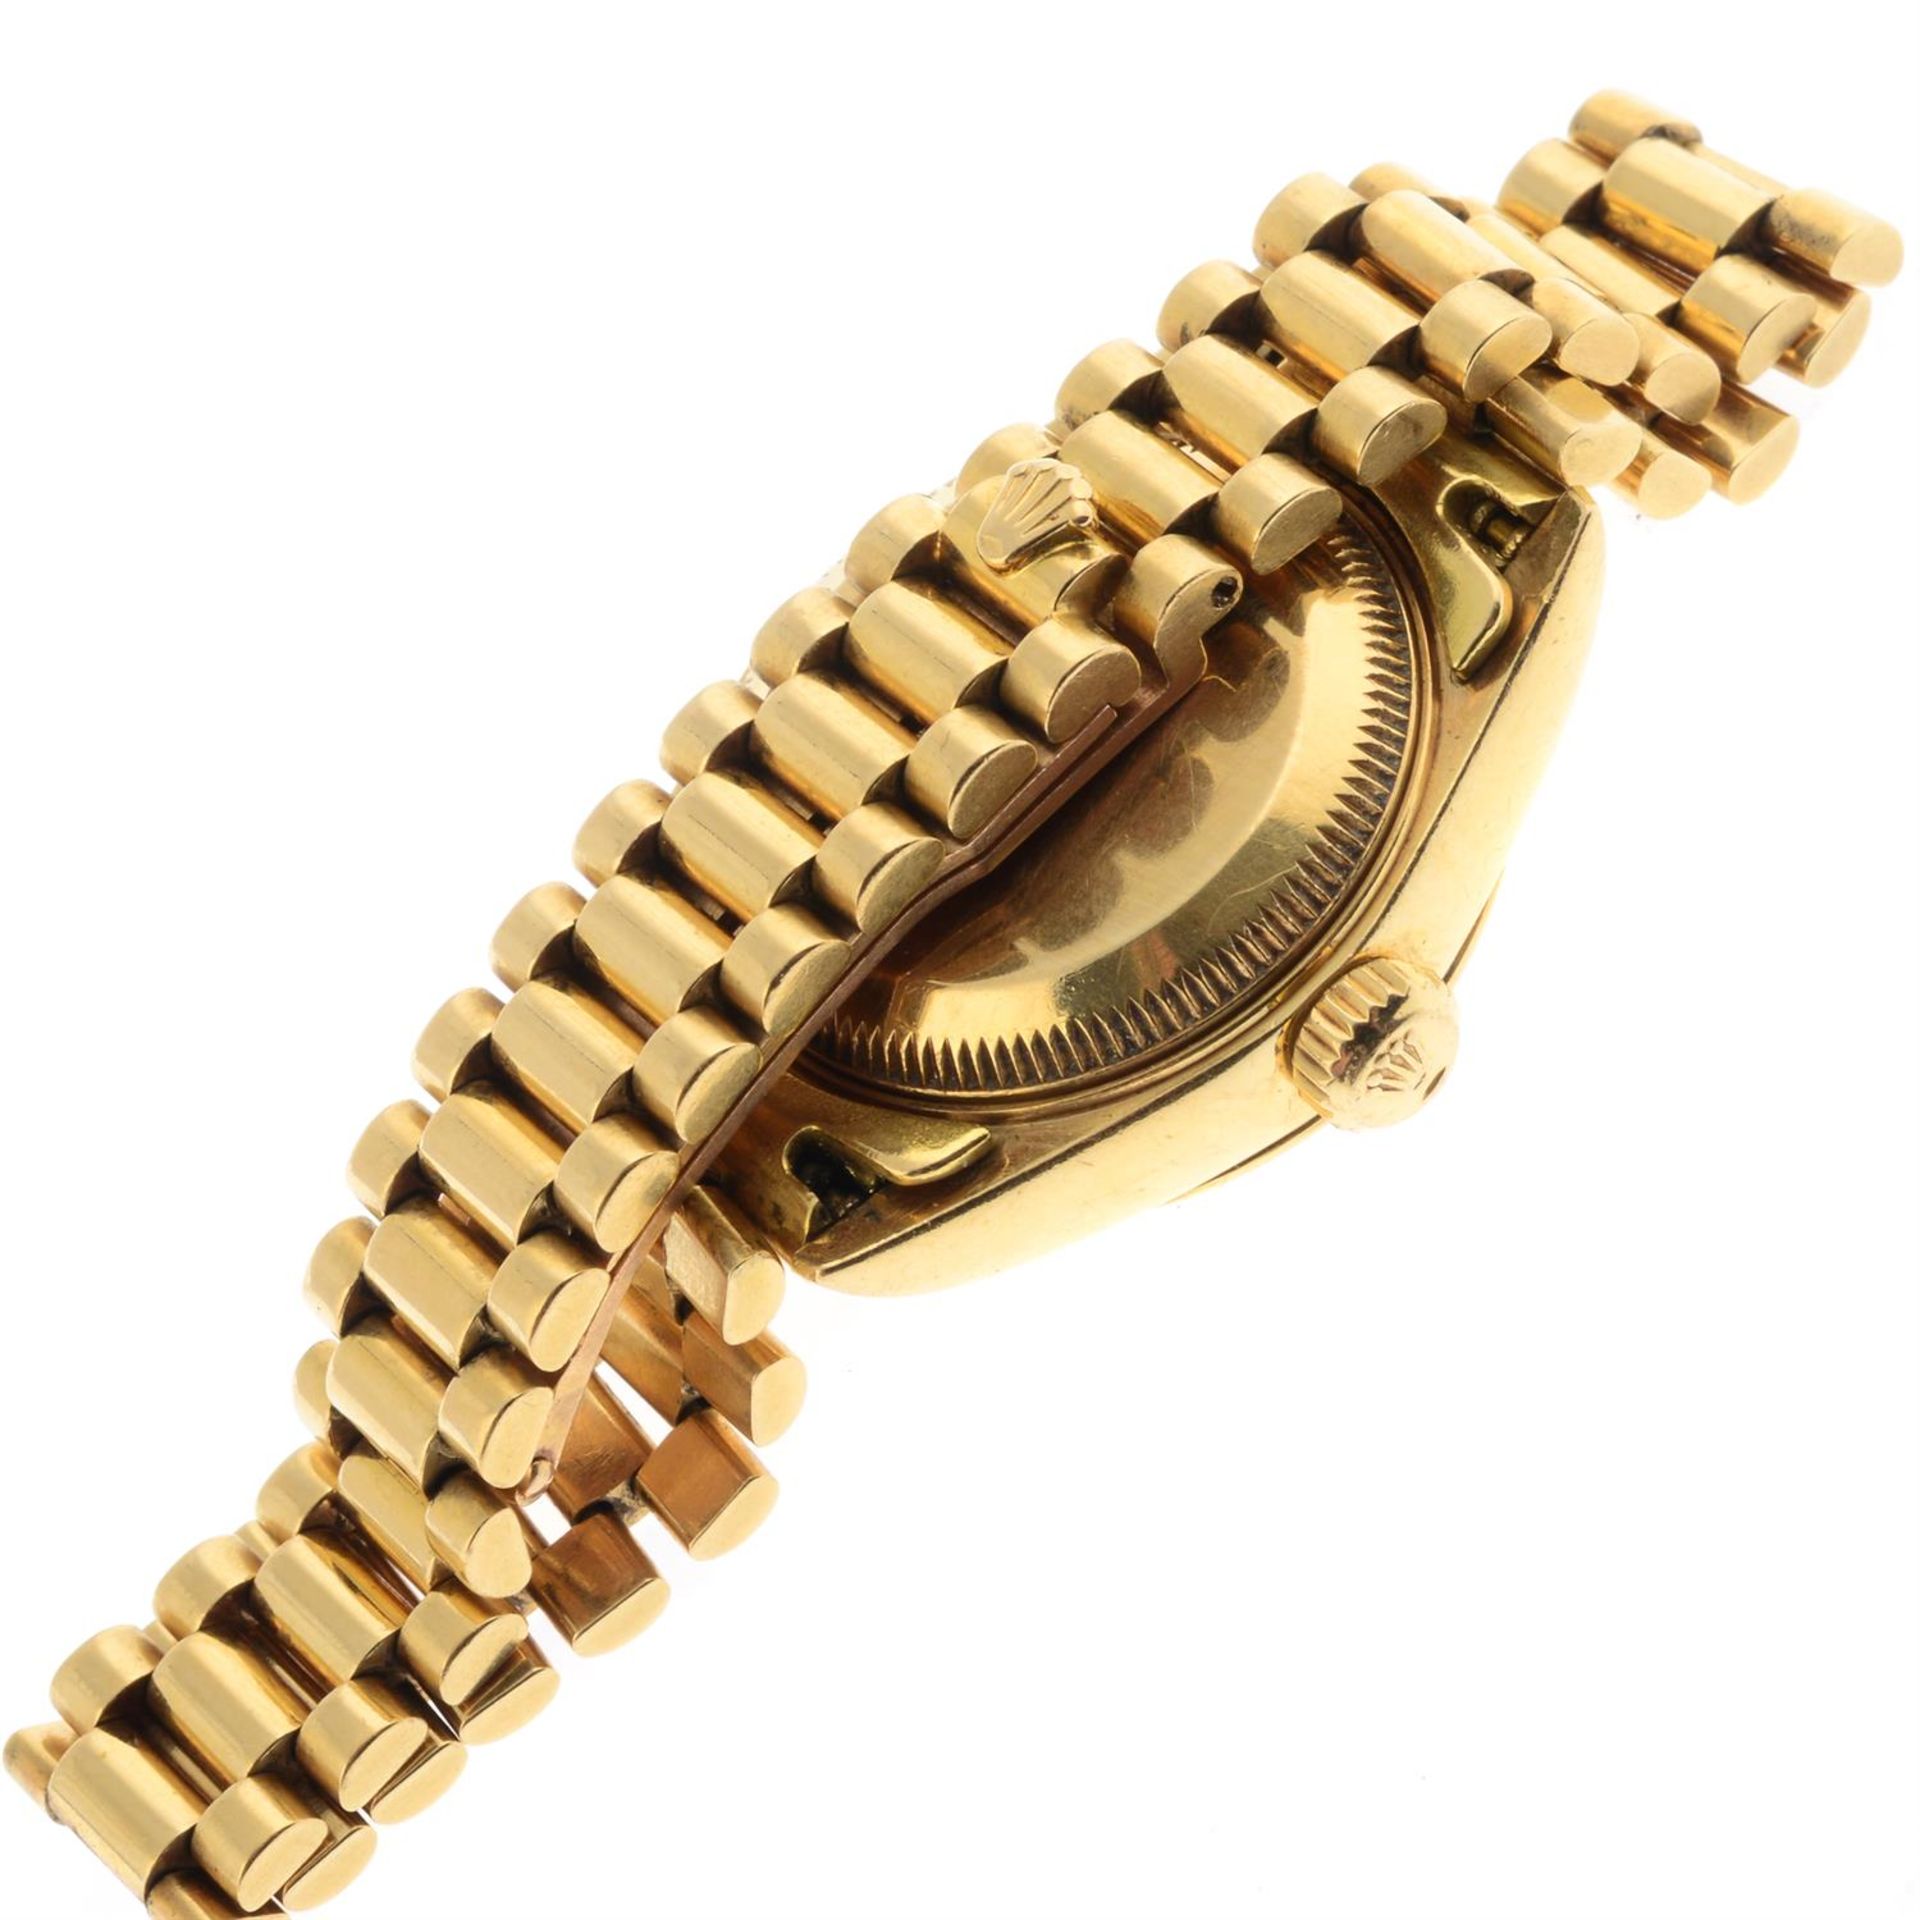 ROLEX - an 18ct yellow gold Oyster Perpetual Datejust bracelet watch, 26mm. - Image 3 of 5